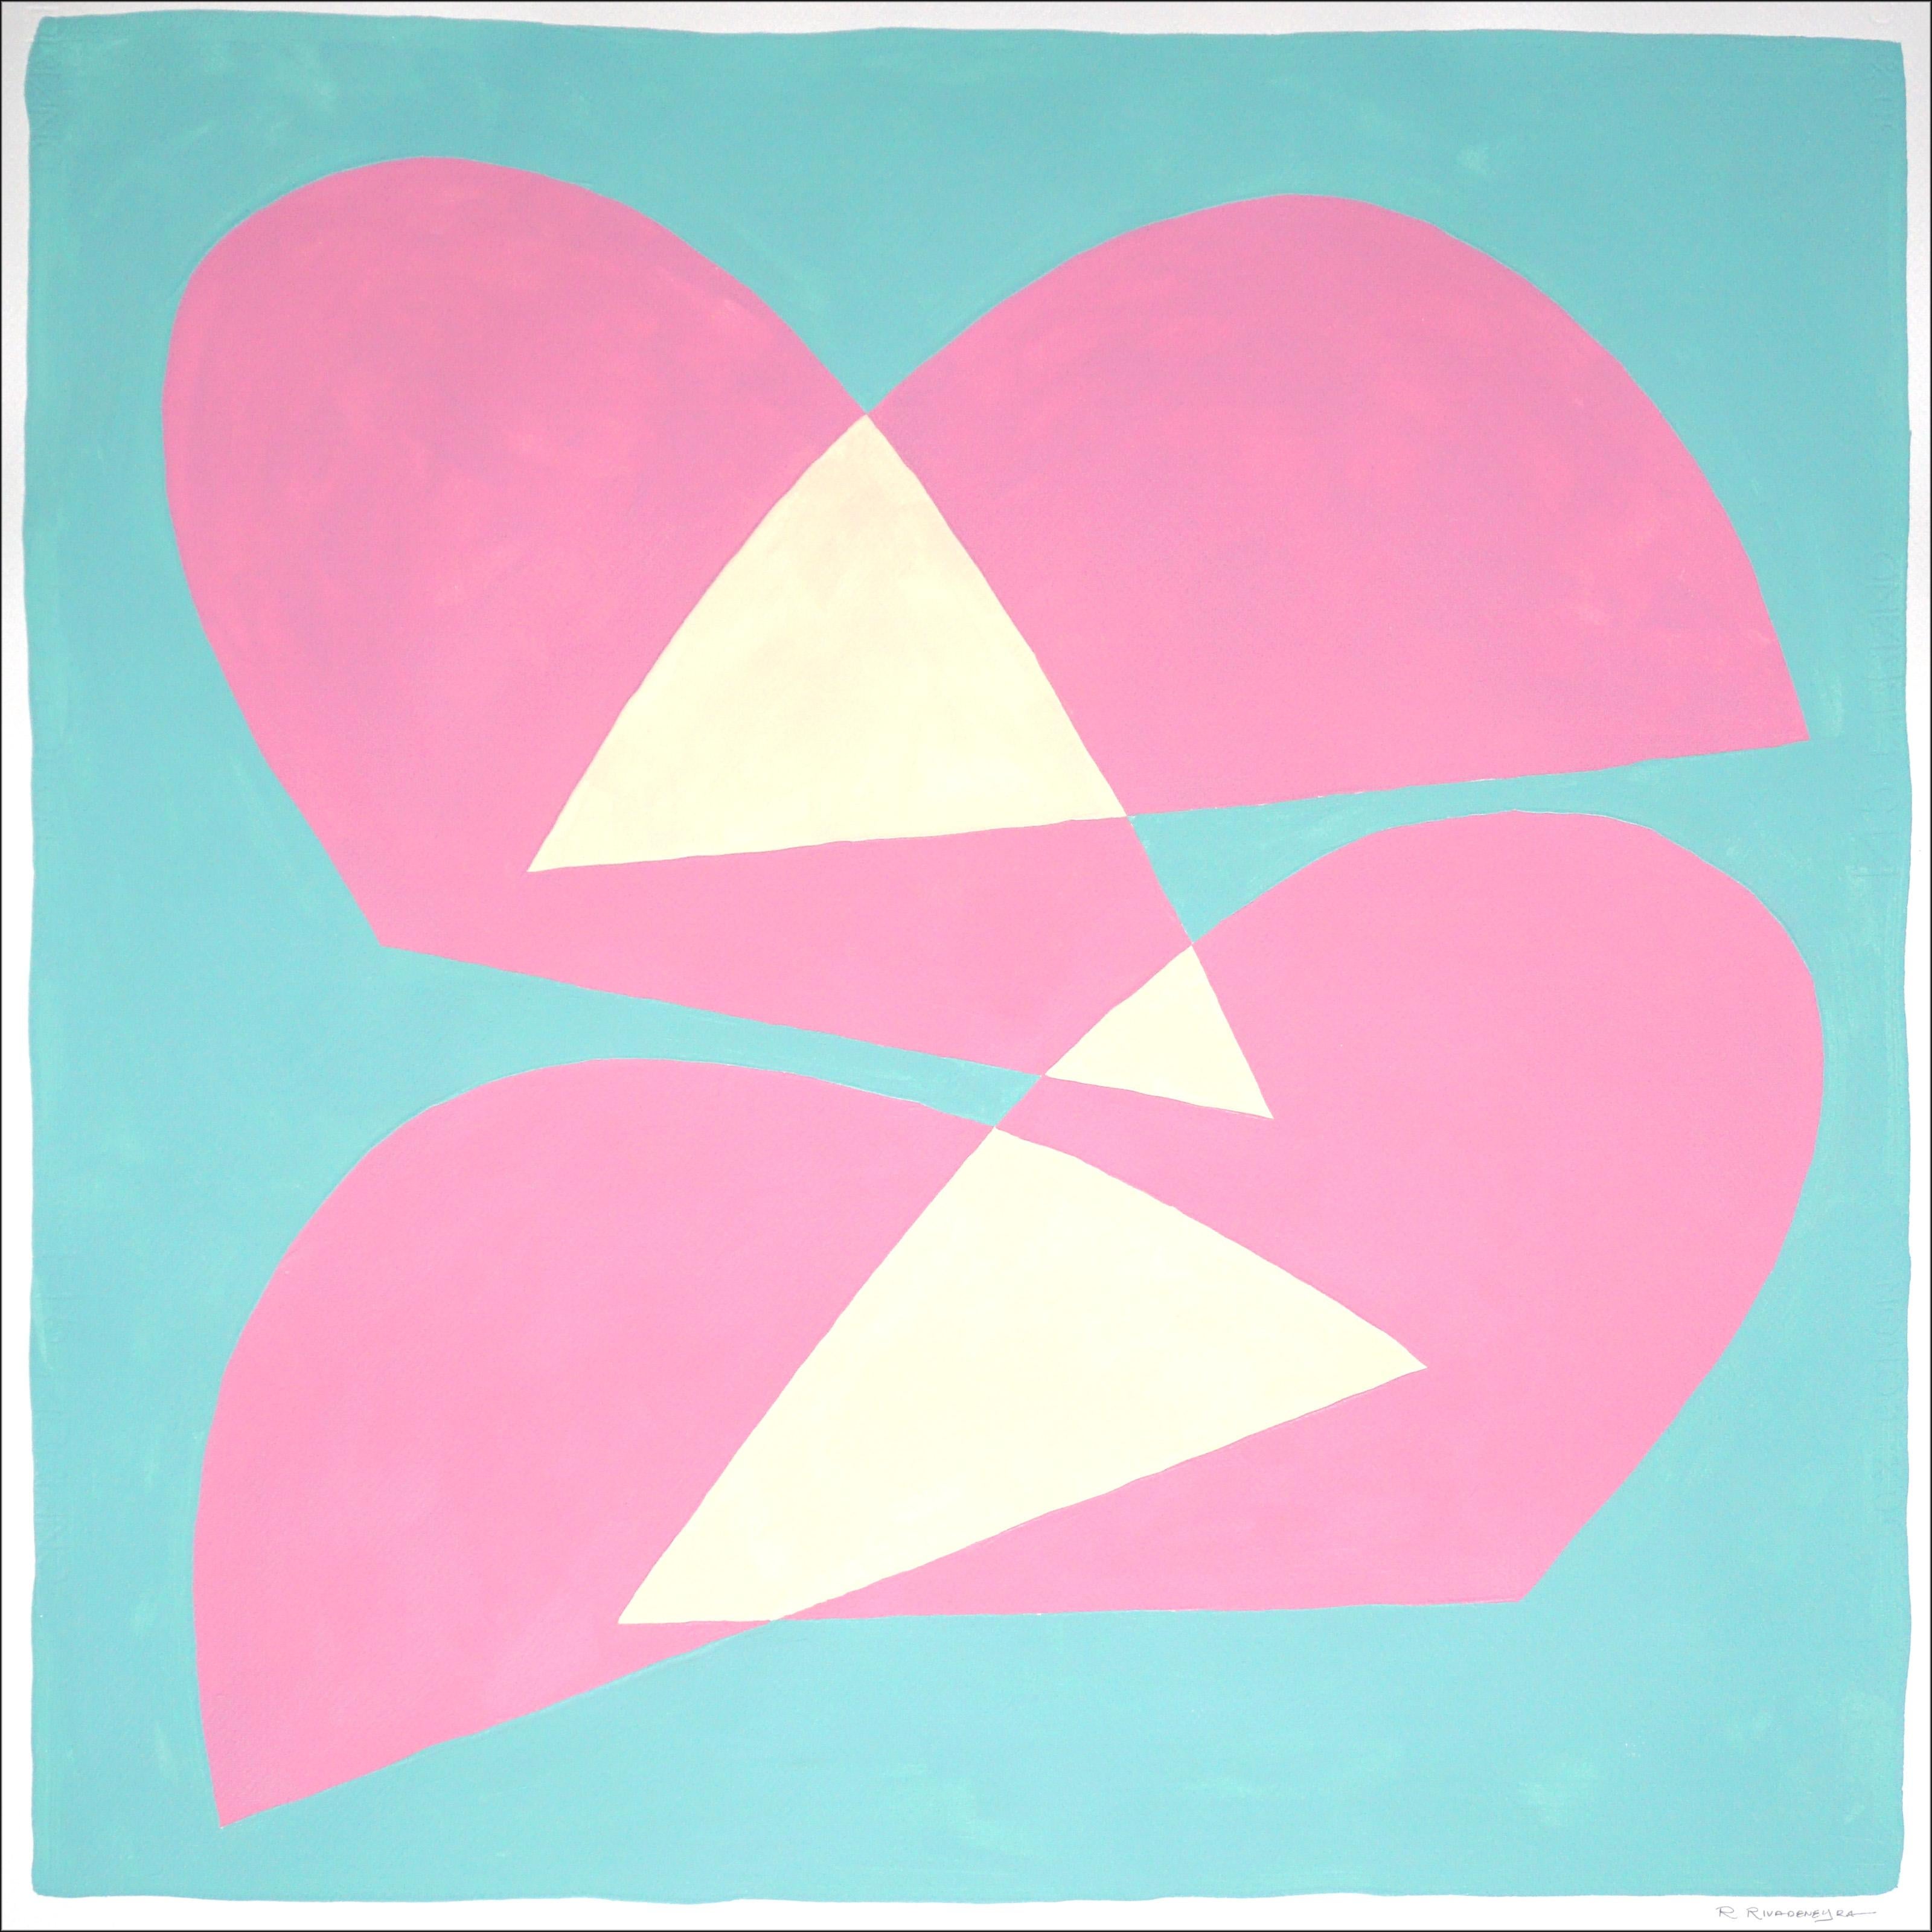 Crossing Arcs, Cutout Pastel Tones Shapes, Pale Pink, Turquoise, Modern, Neutral